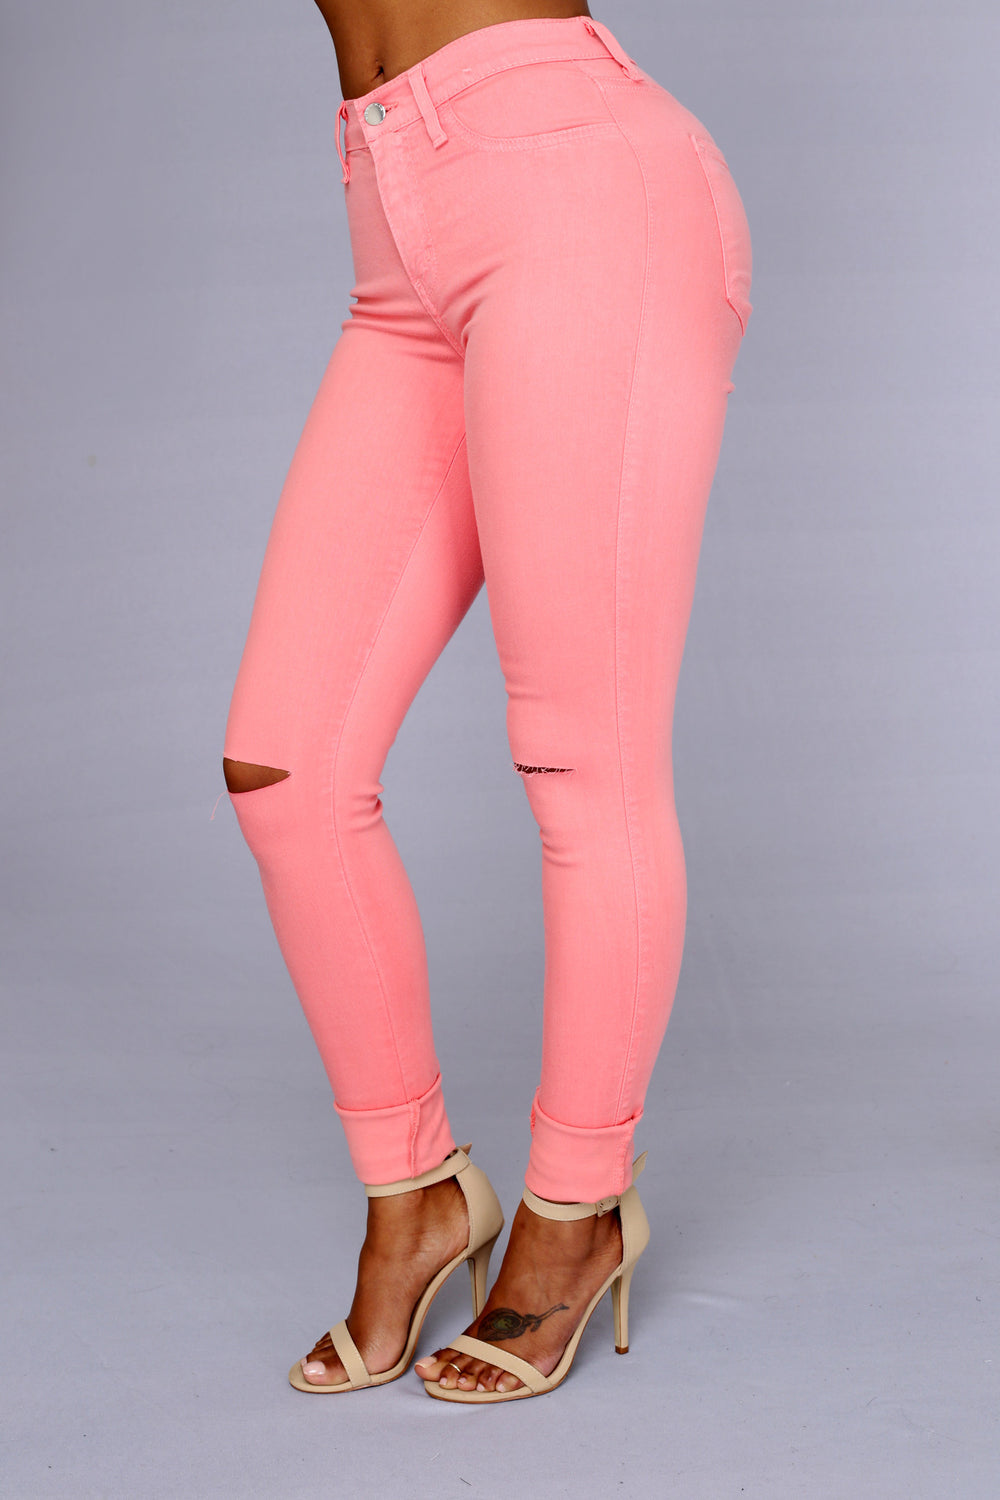 Canopy Jeans - Coral